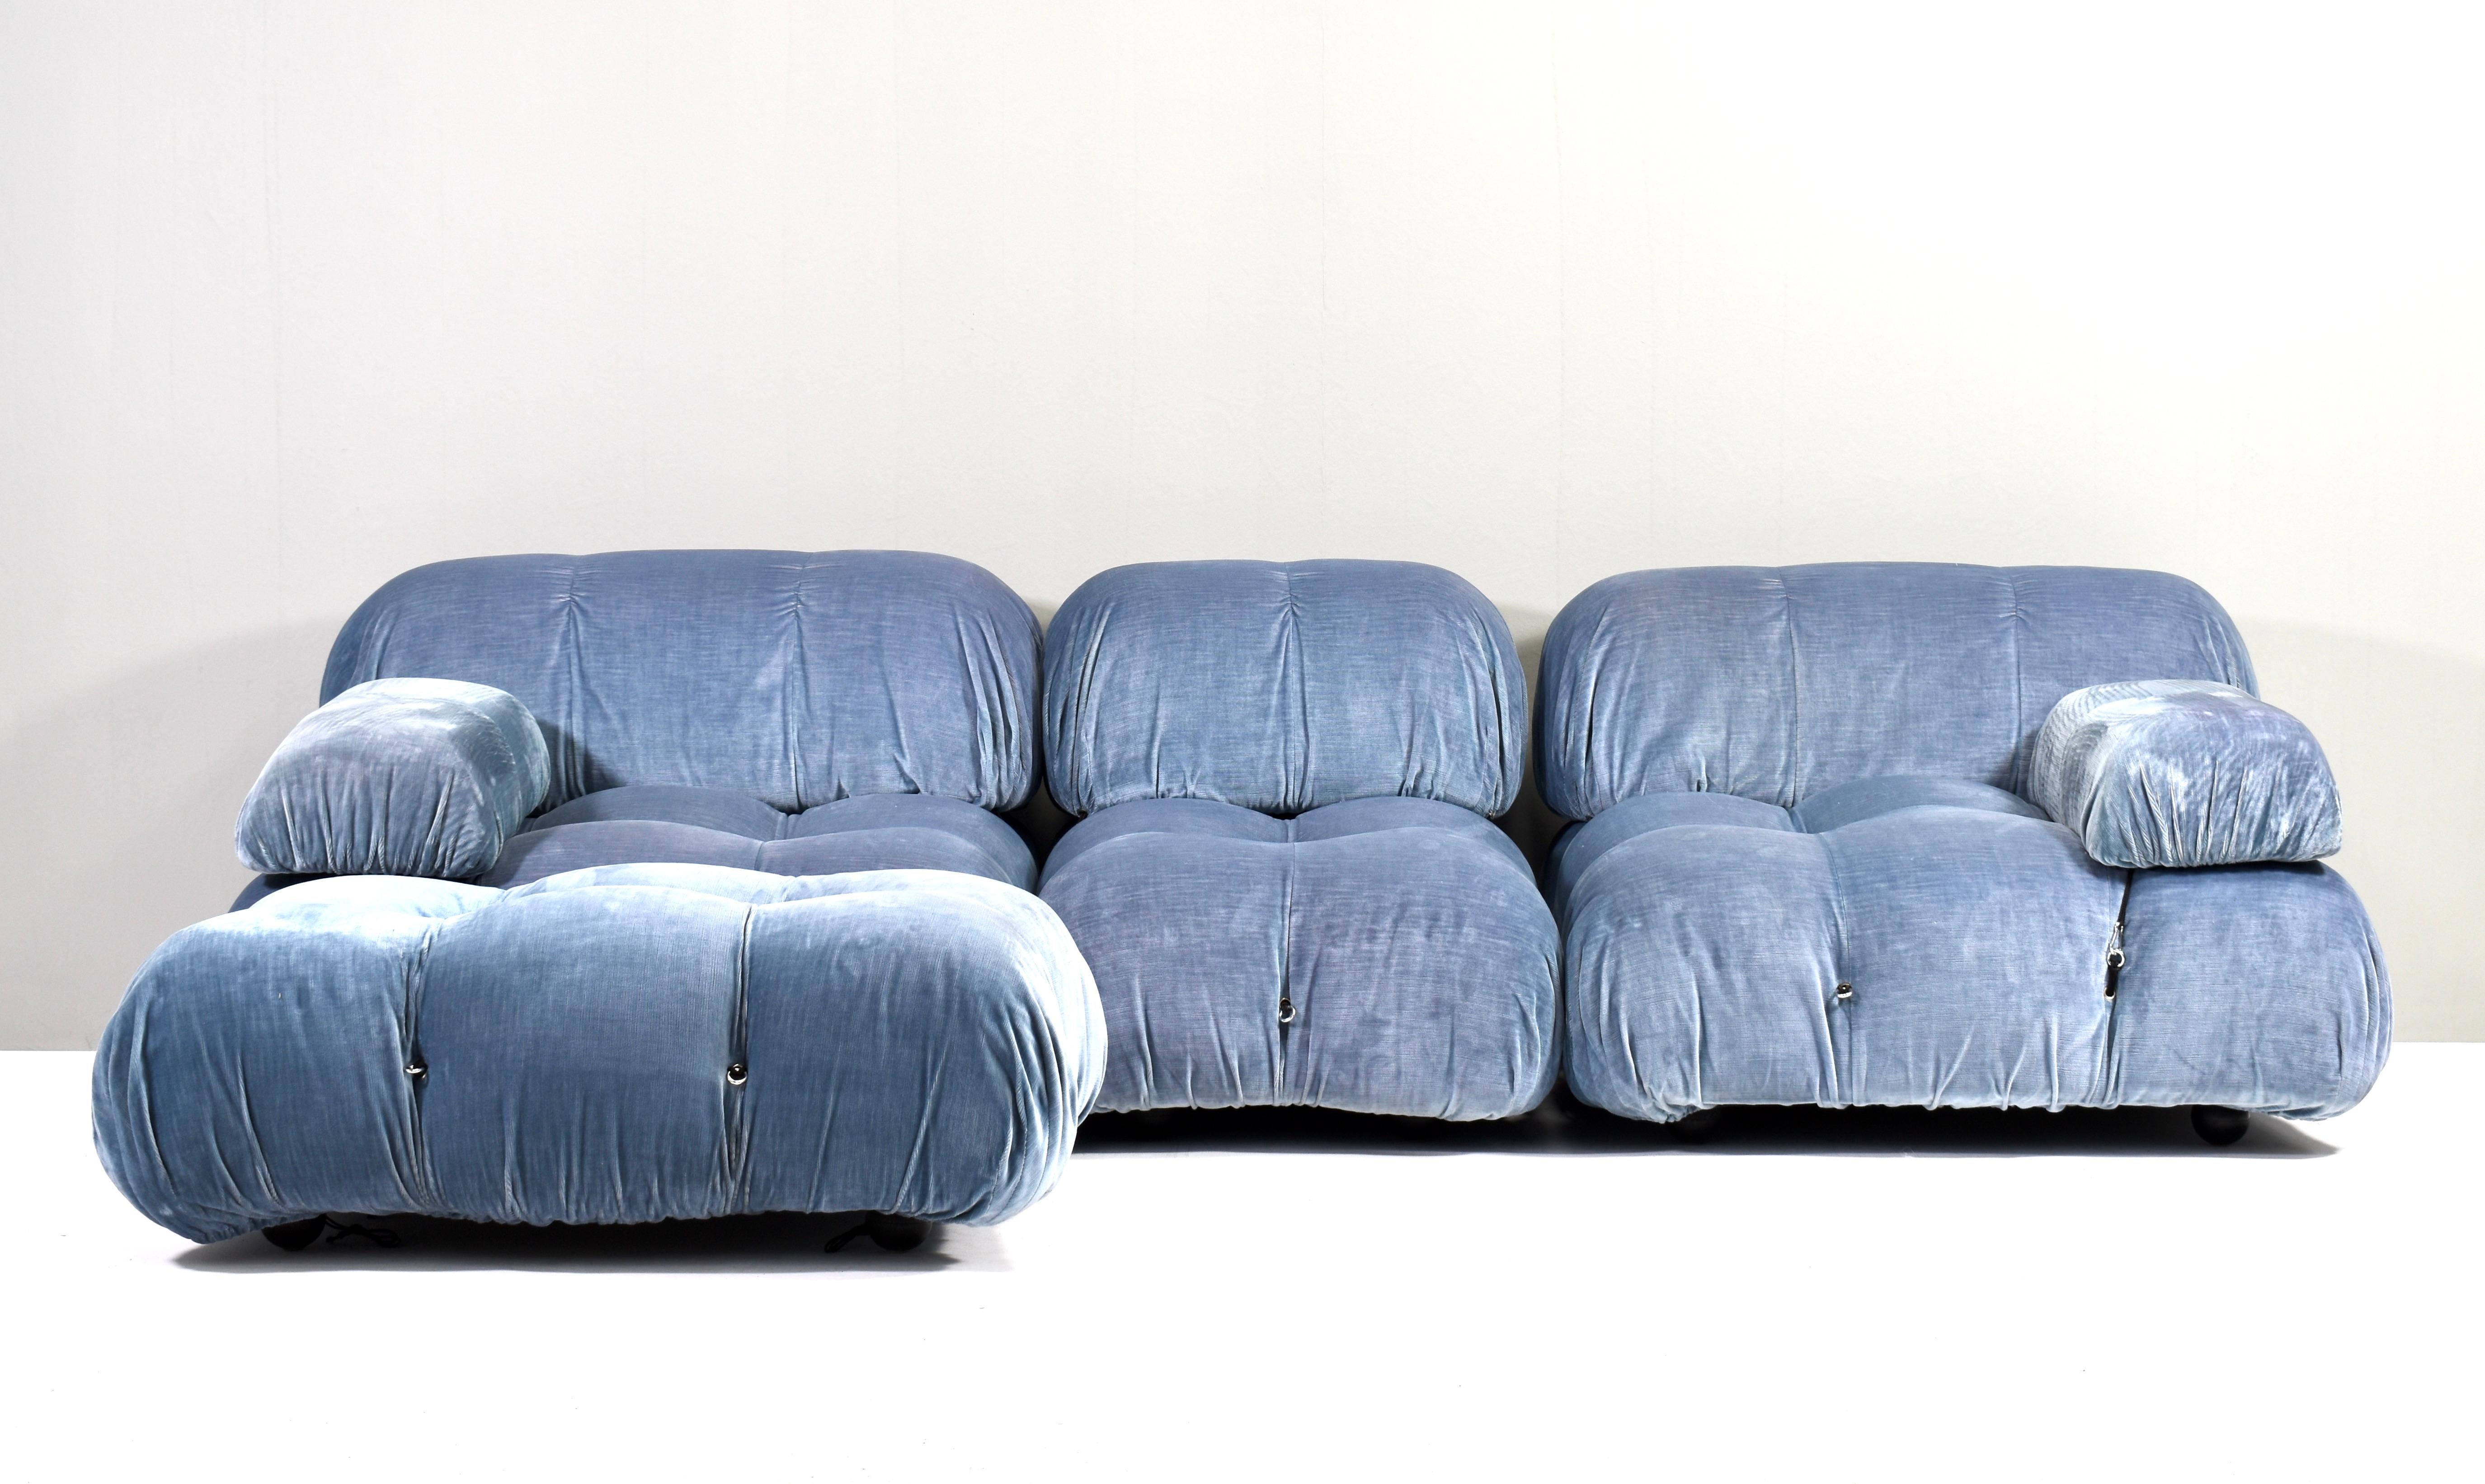 Camaleonda sofa by Mario Bellini for C&B Italia, still in it's original blue velvet – Italy, circa 1970’s. 
C&B Italia was the initial manufacturer before it later became B&B Italia, therefore this is the original 1st edition version of the sofa.